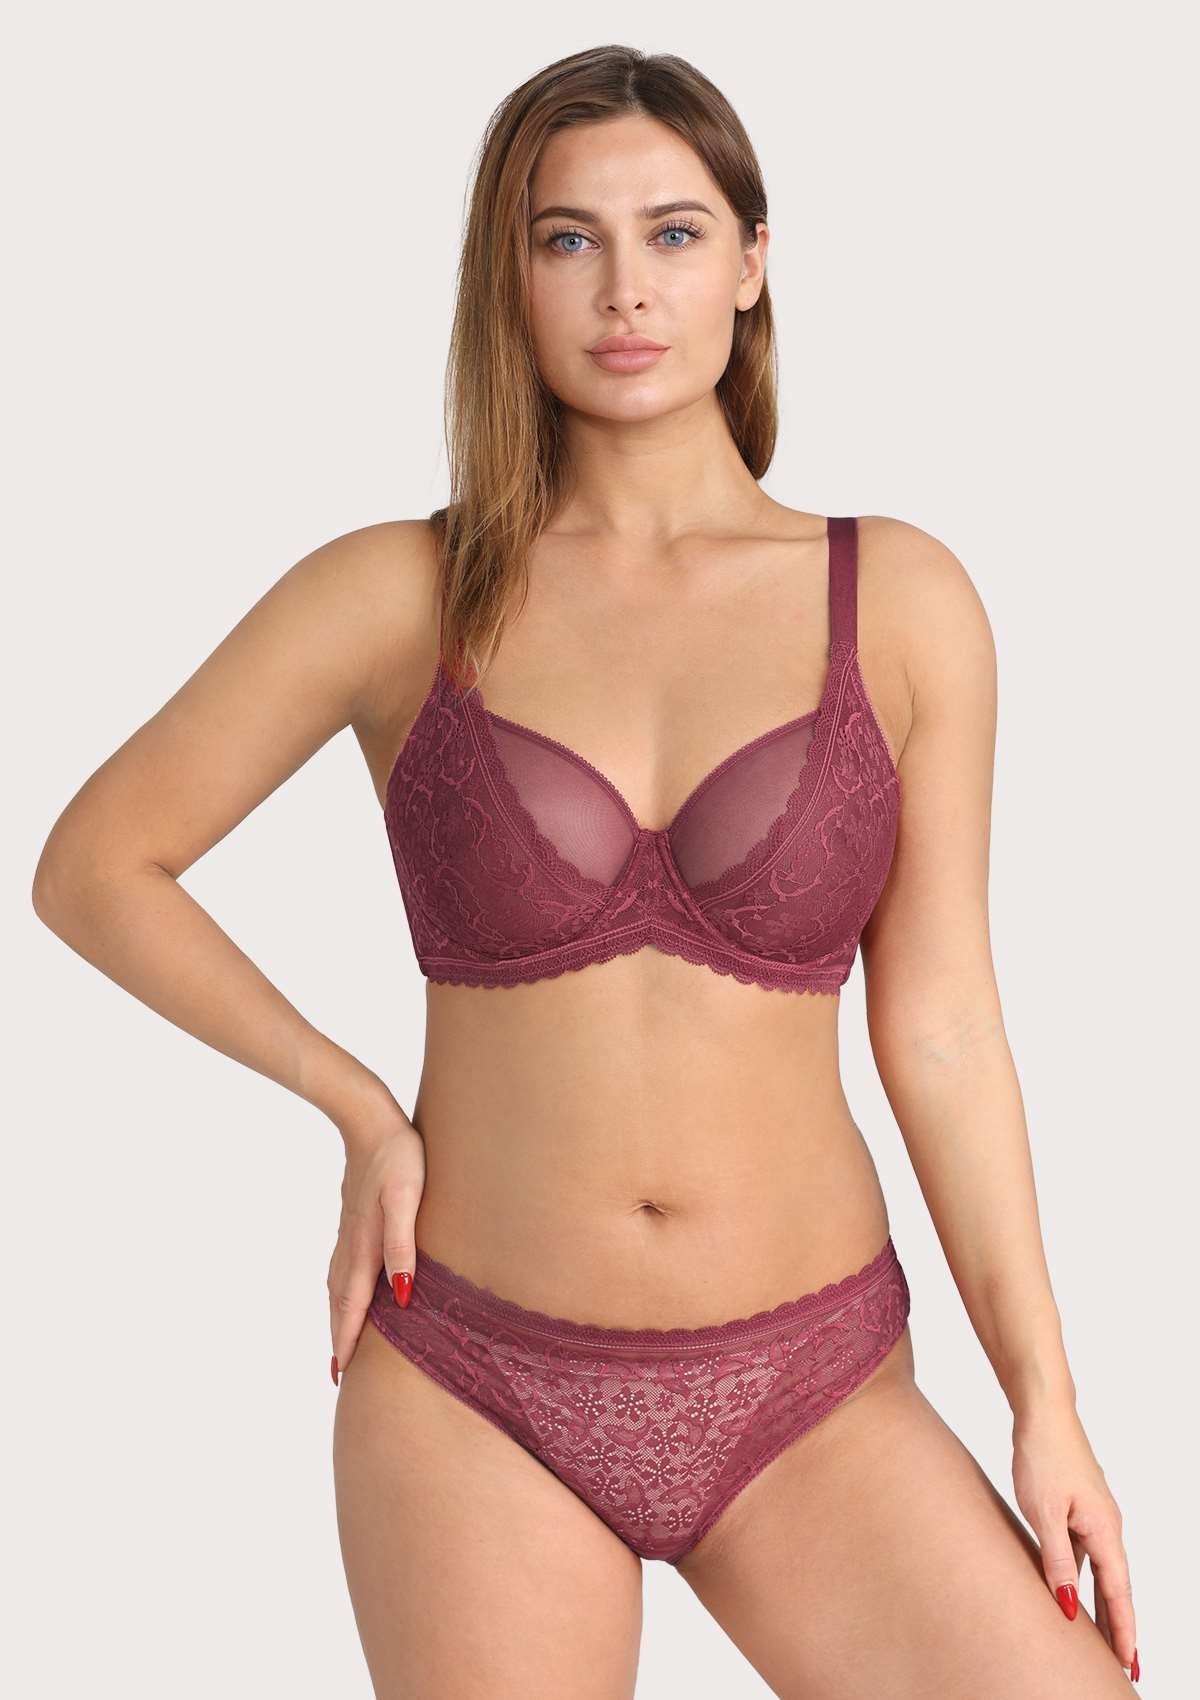 HSIA Anemone Big Bra: Best Bra For Lift And Support, Floral Bra - Burgundy / 34 / C